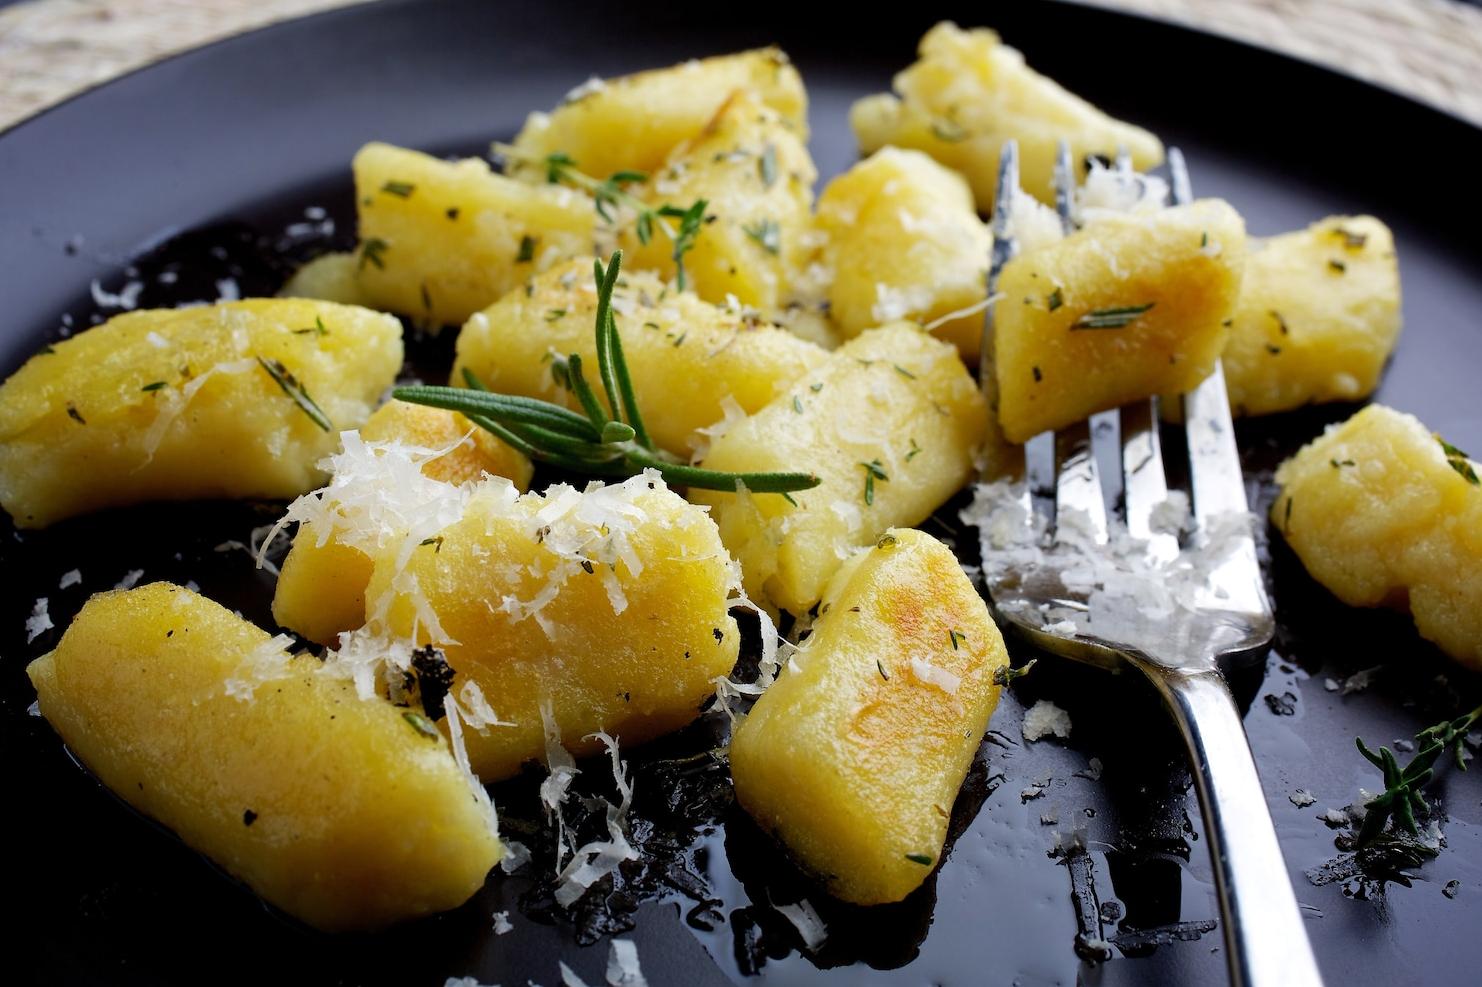  Crispy on the outside, soft on the inside. These gnocchi are a true treat!